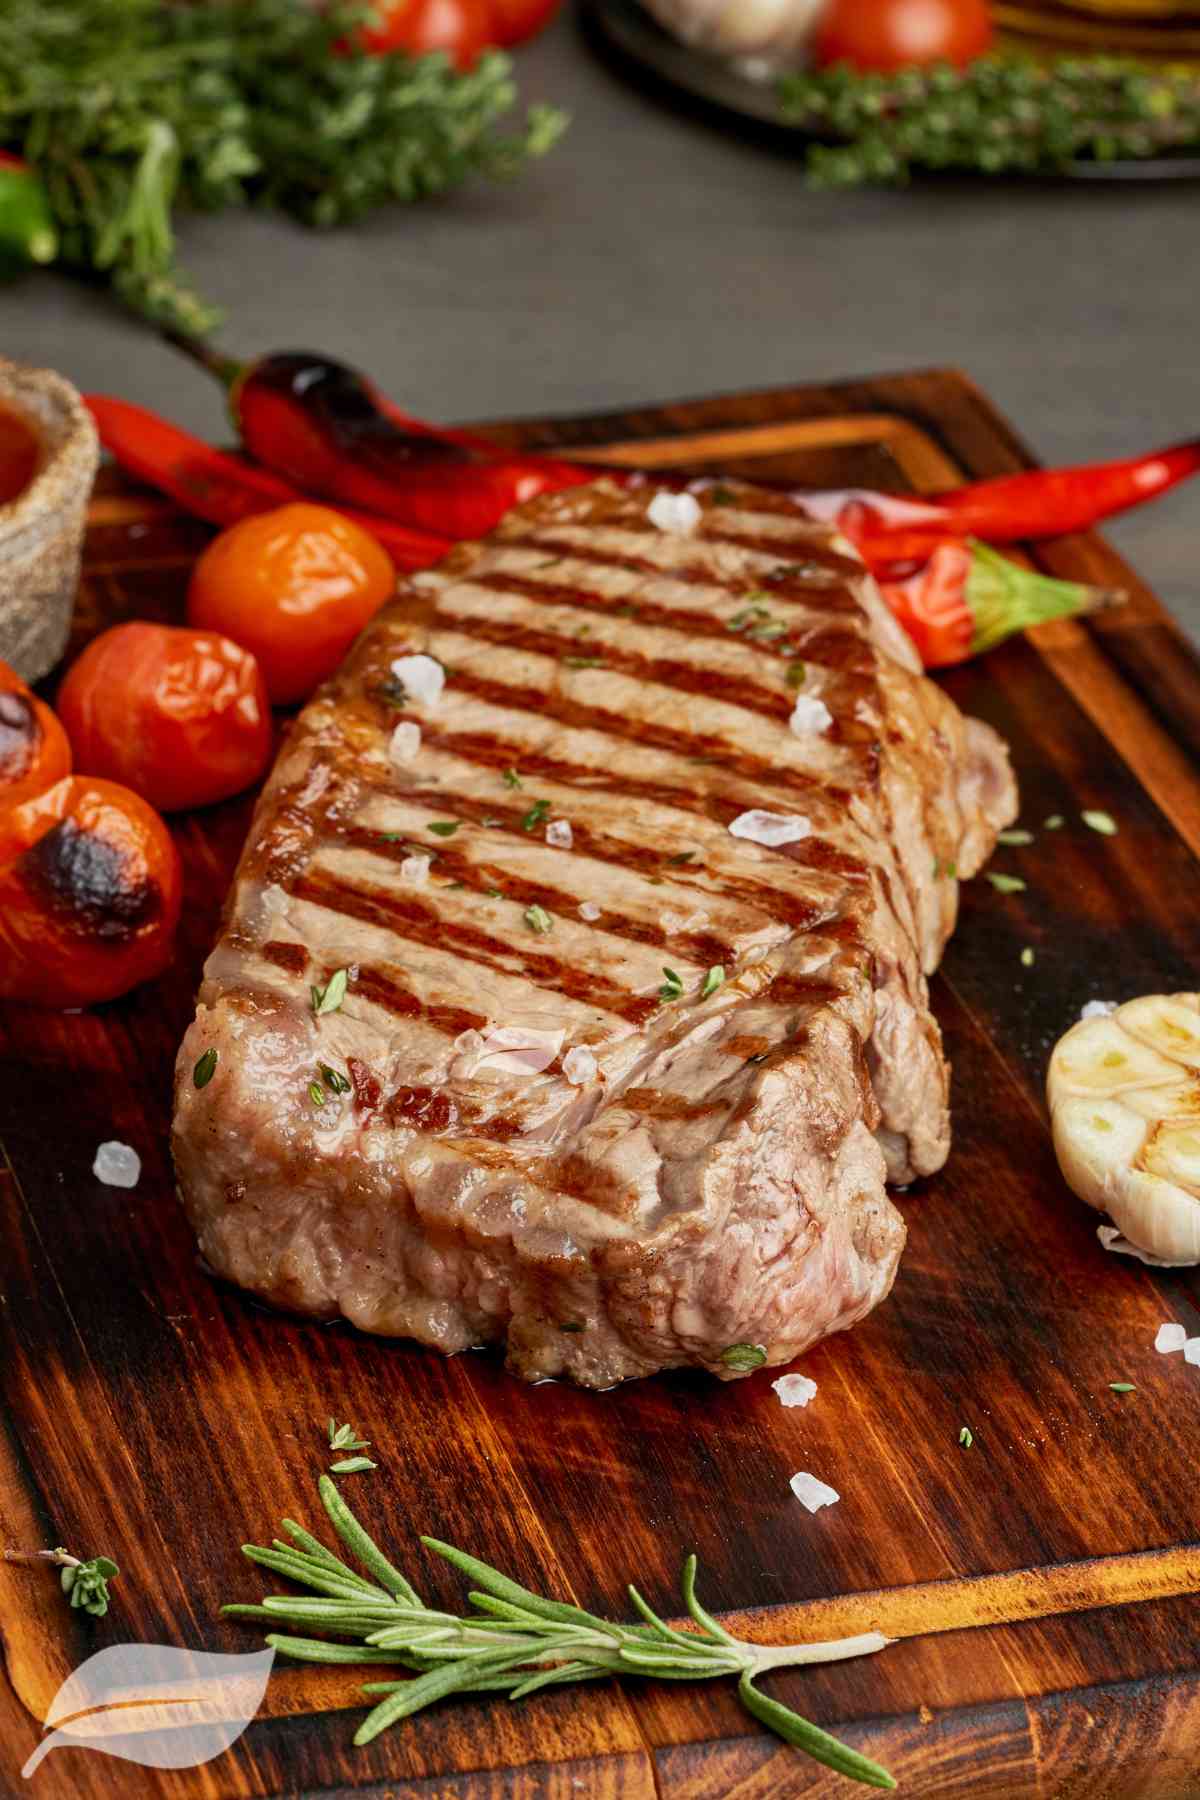 Grilled Steak on a wooden board with cherry tomatoes